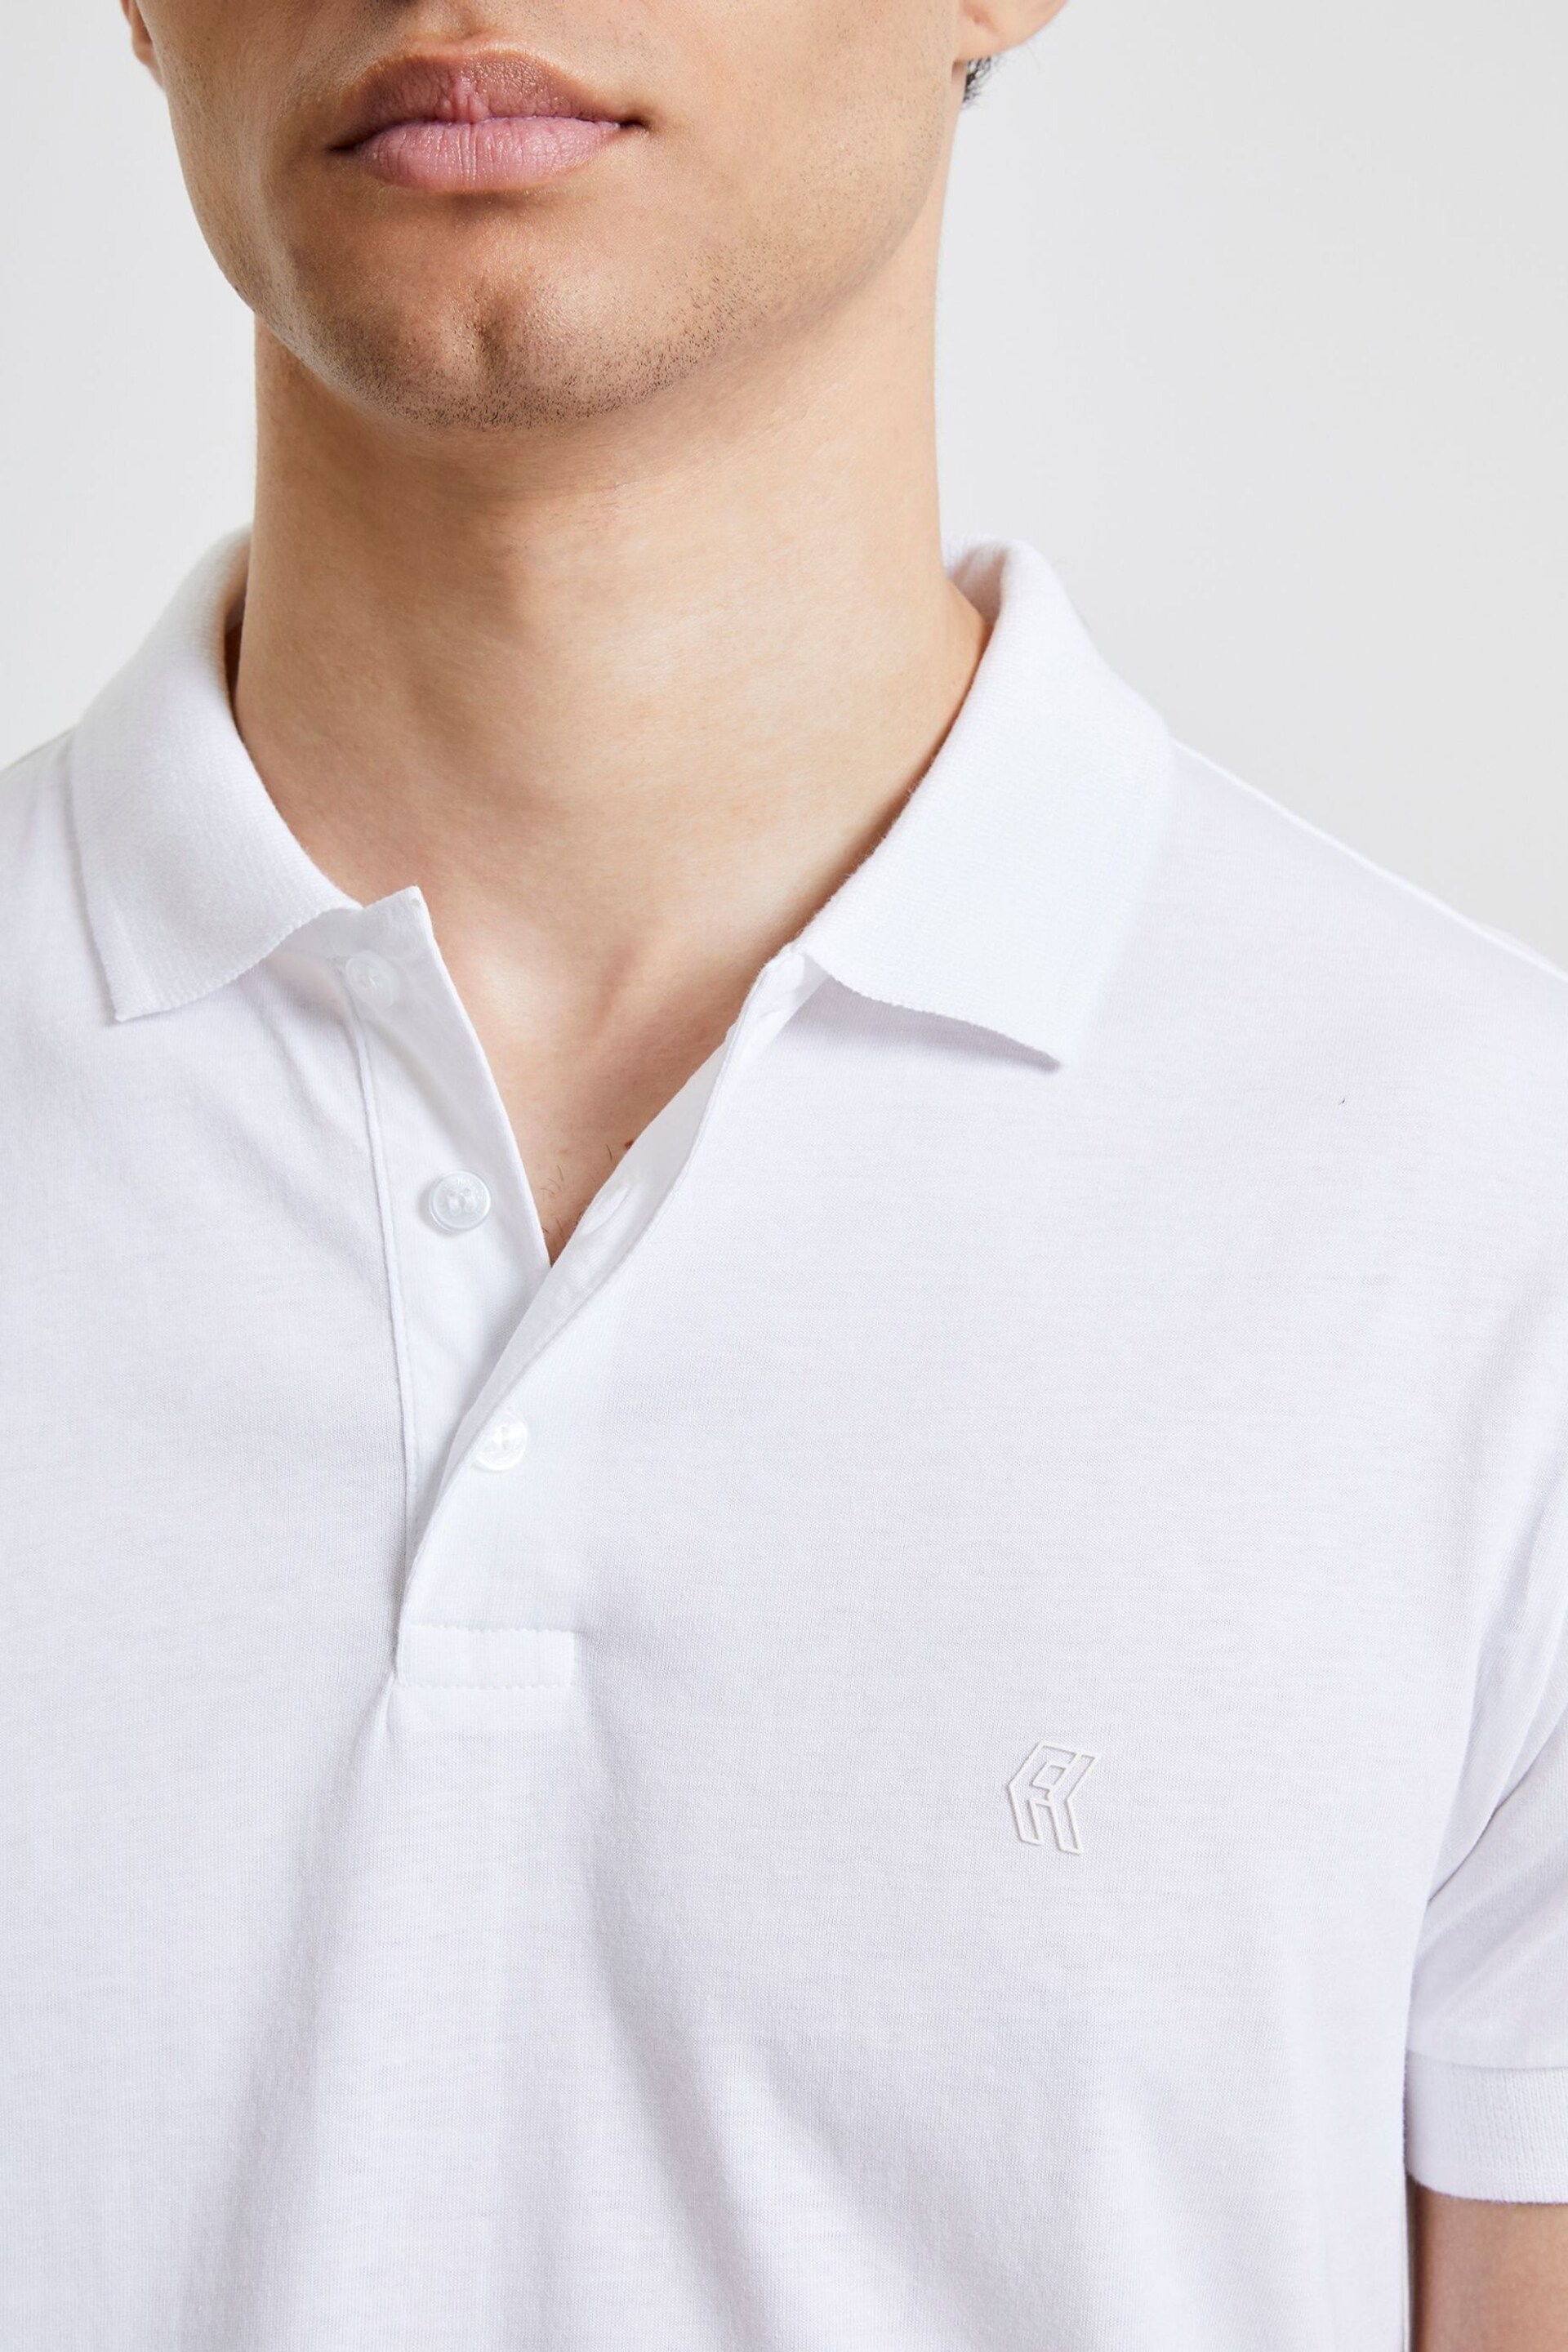 French Connection Signature Polo Shirt - Image 4 of 4